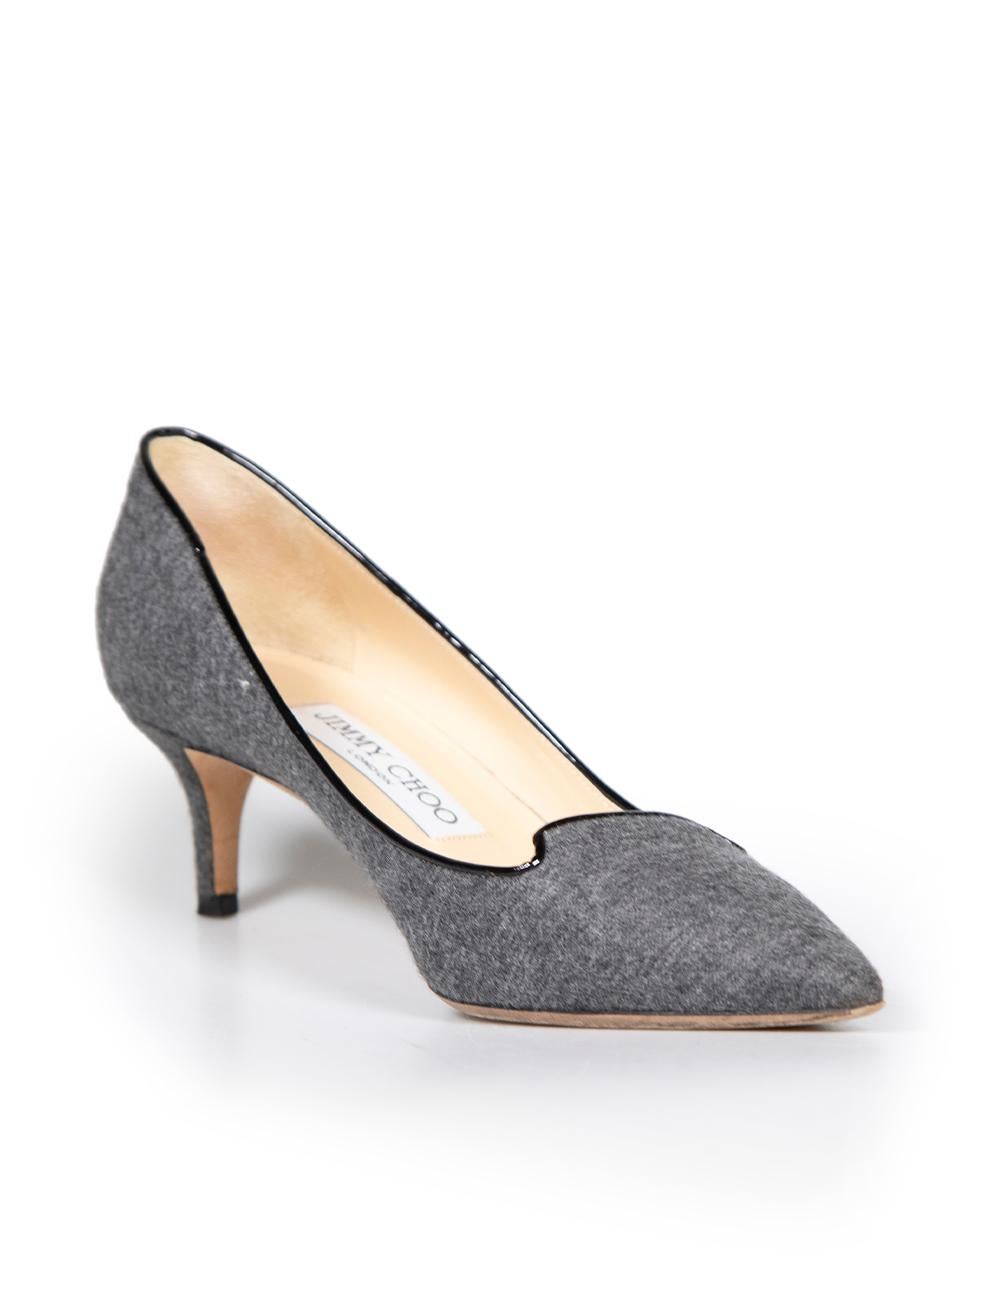 CONDITION is Very good. Minimal wear to pumps is evident. Minimal wear to soles, with a small mark on the right insole on this used Jimmy Choo designer resale item.
 
 
 
 Details
 
 
 Grey
 
 Wool
 
 Slip on pumps
 
 Pointed toe
 
 Kitten heel
 
